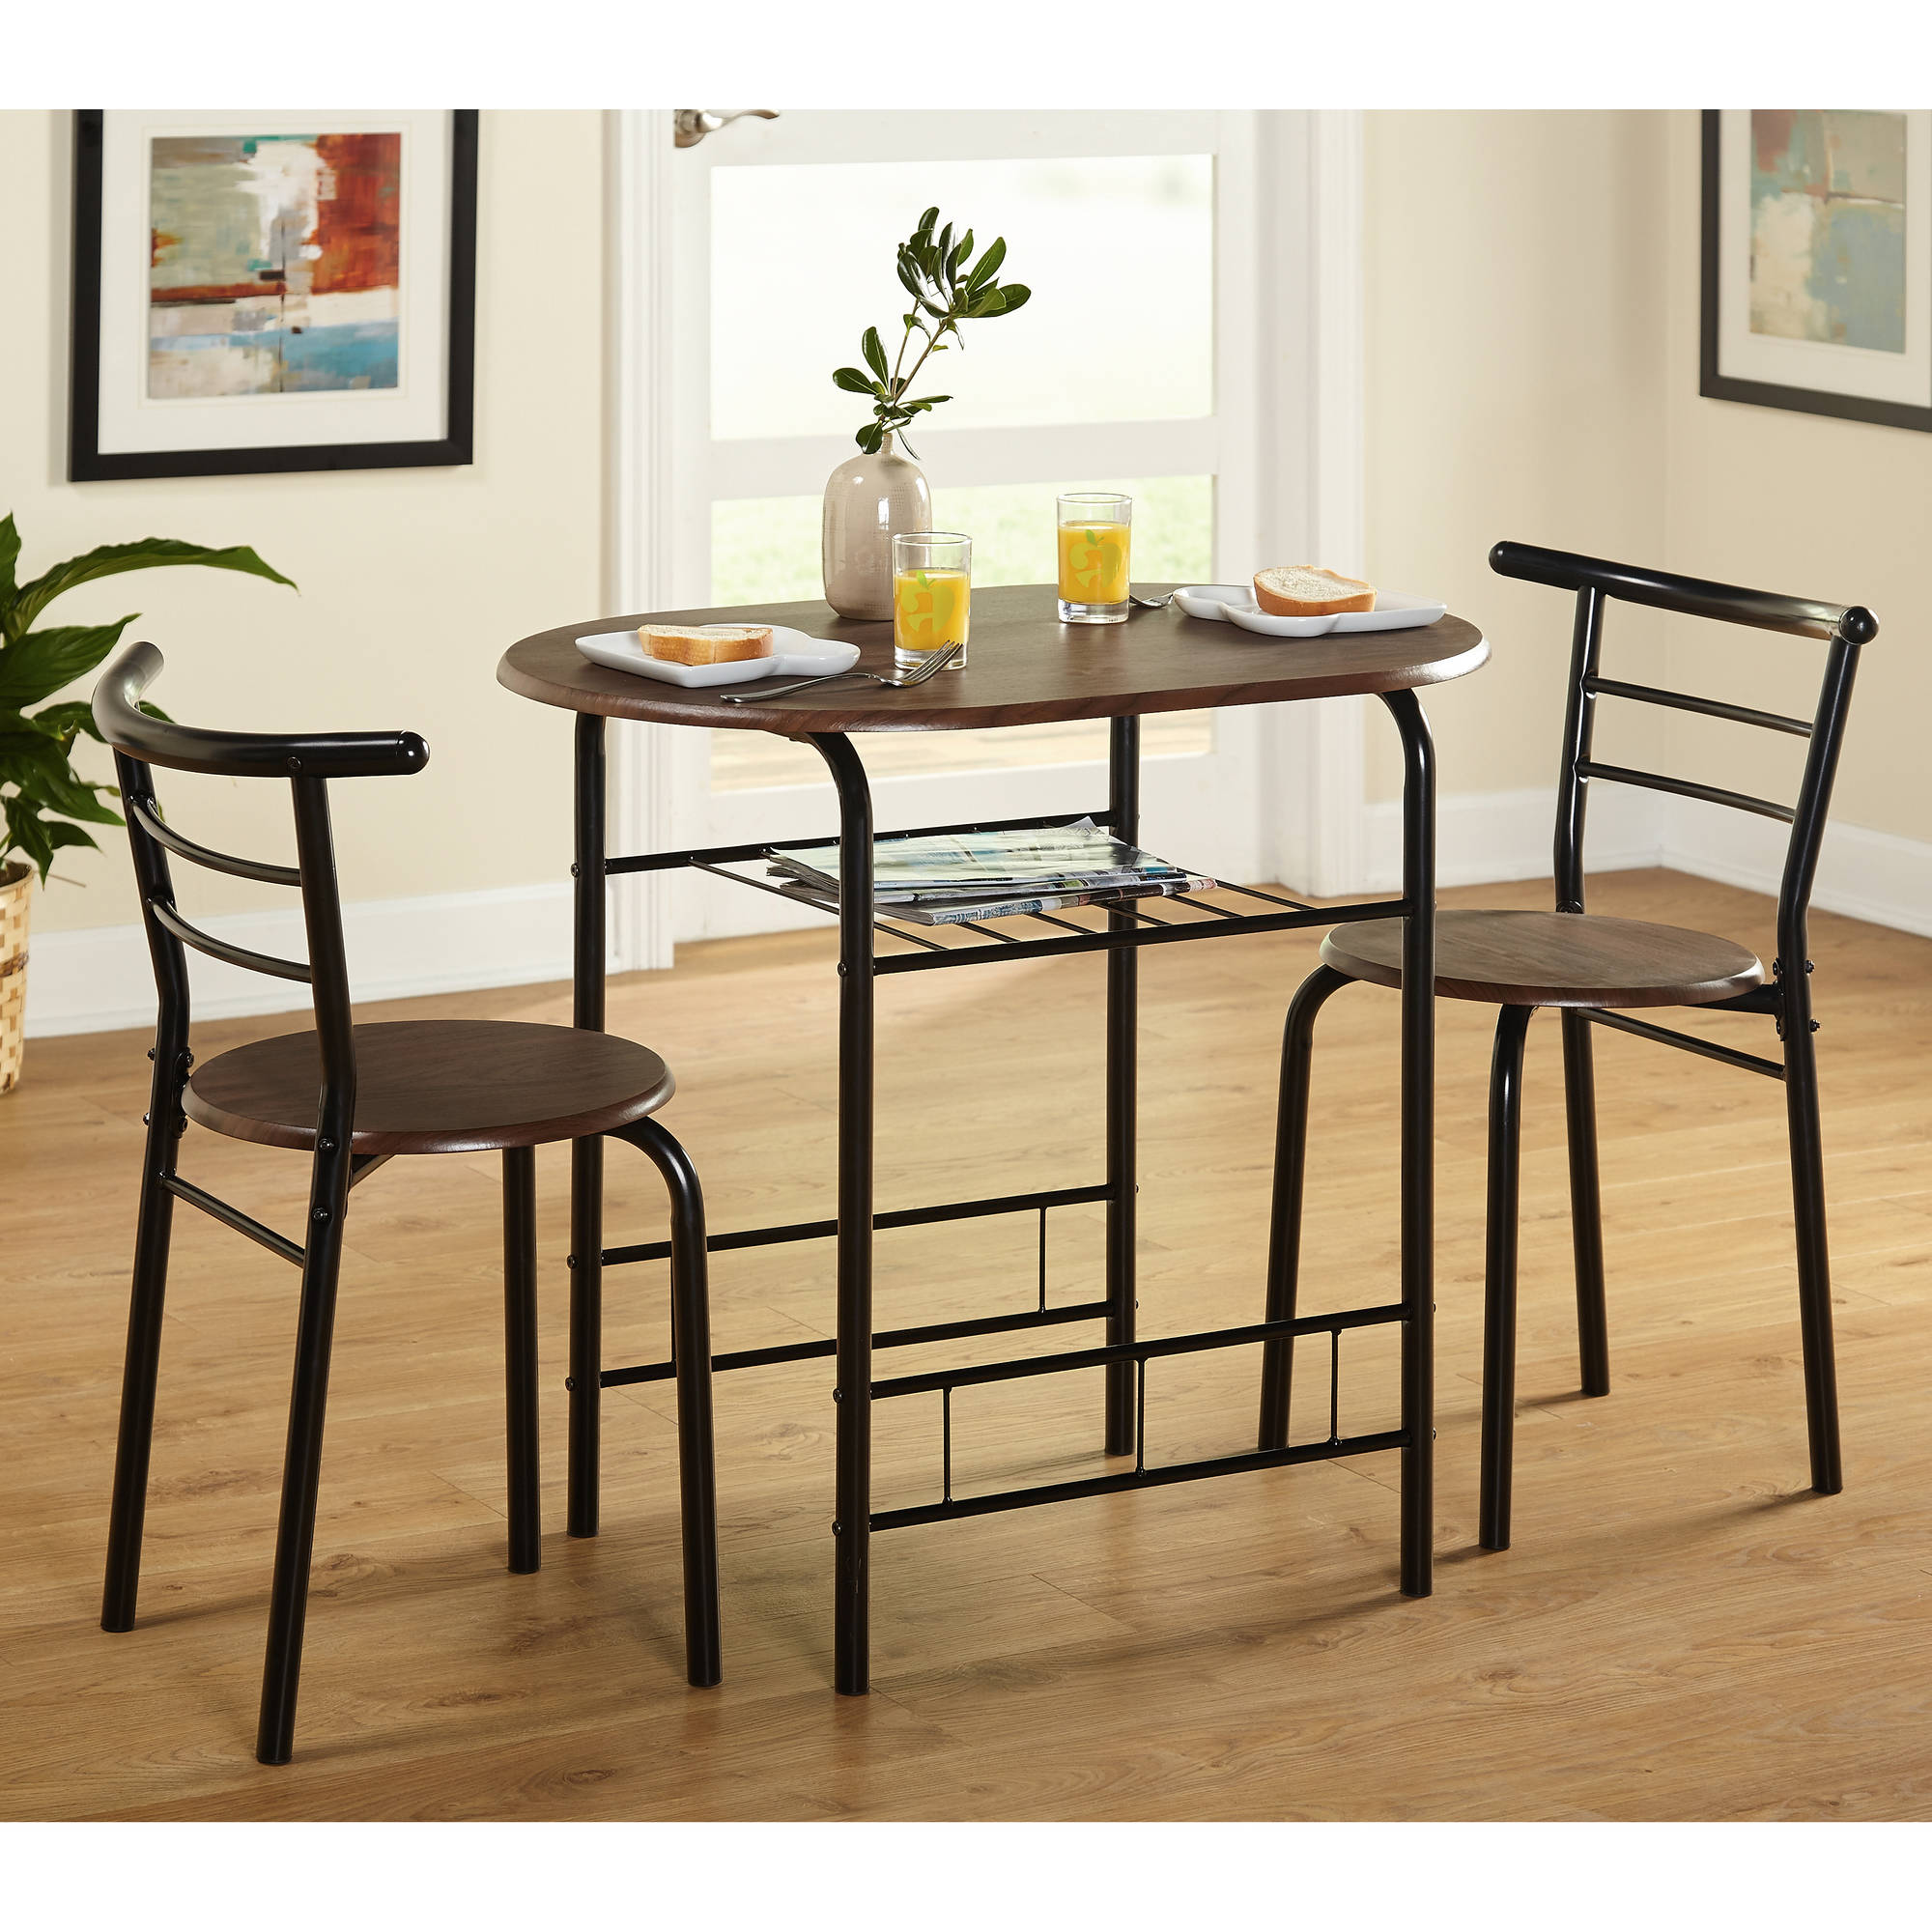 Awesome 3-Piece Bistro Set, Multiple Colors bistro sets for kitchen